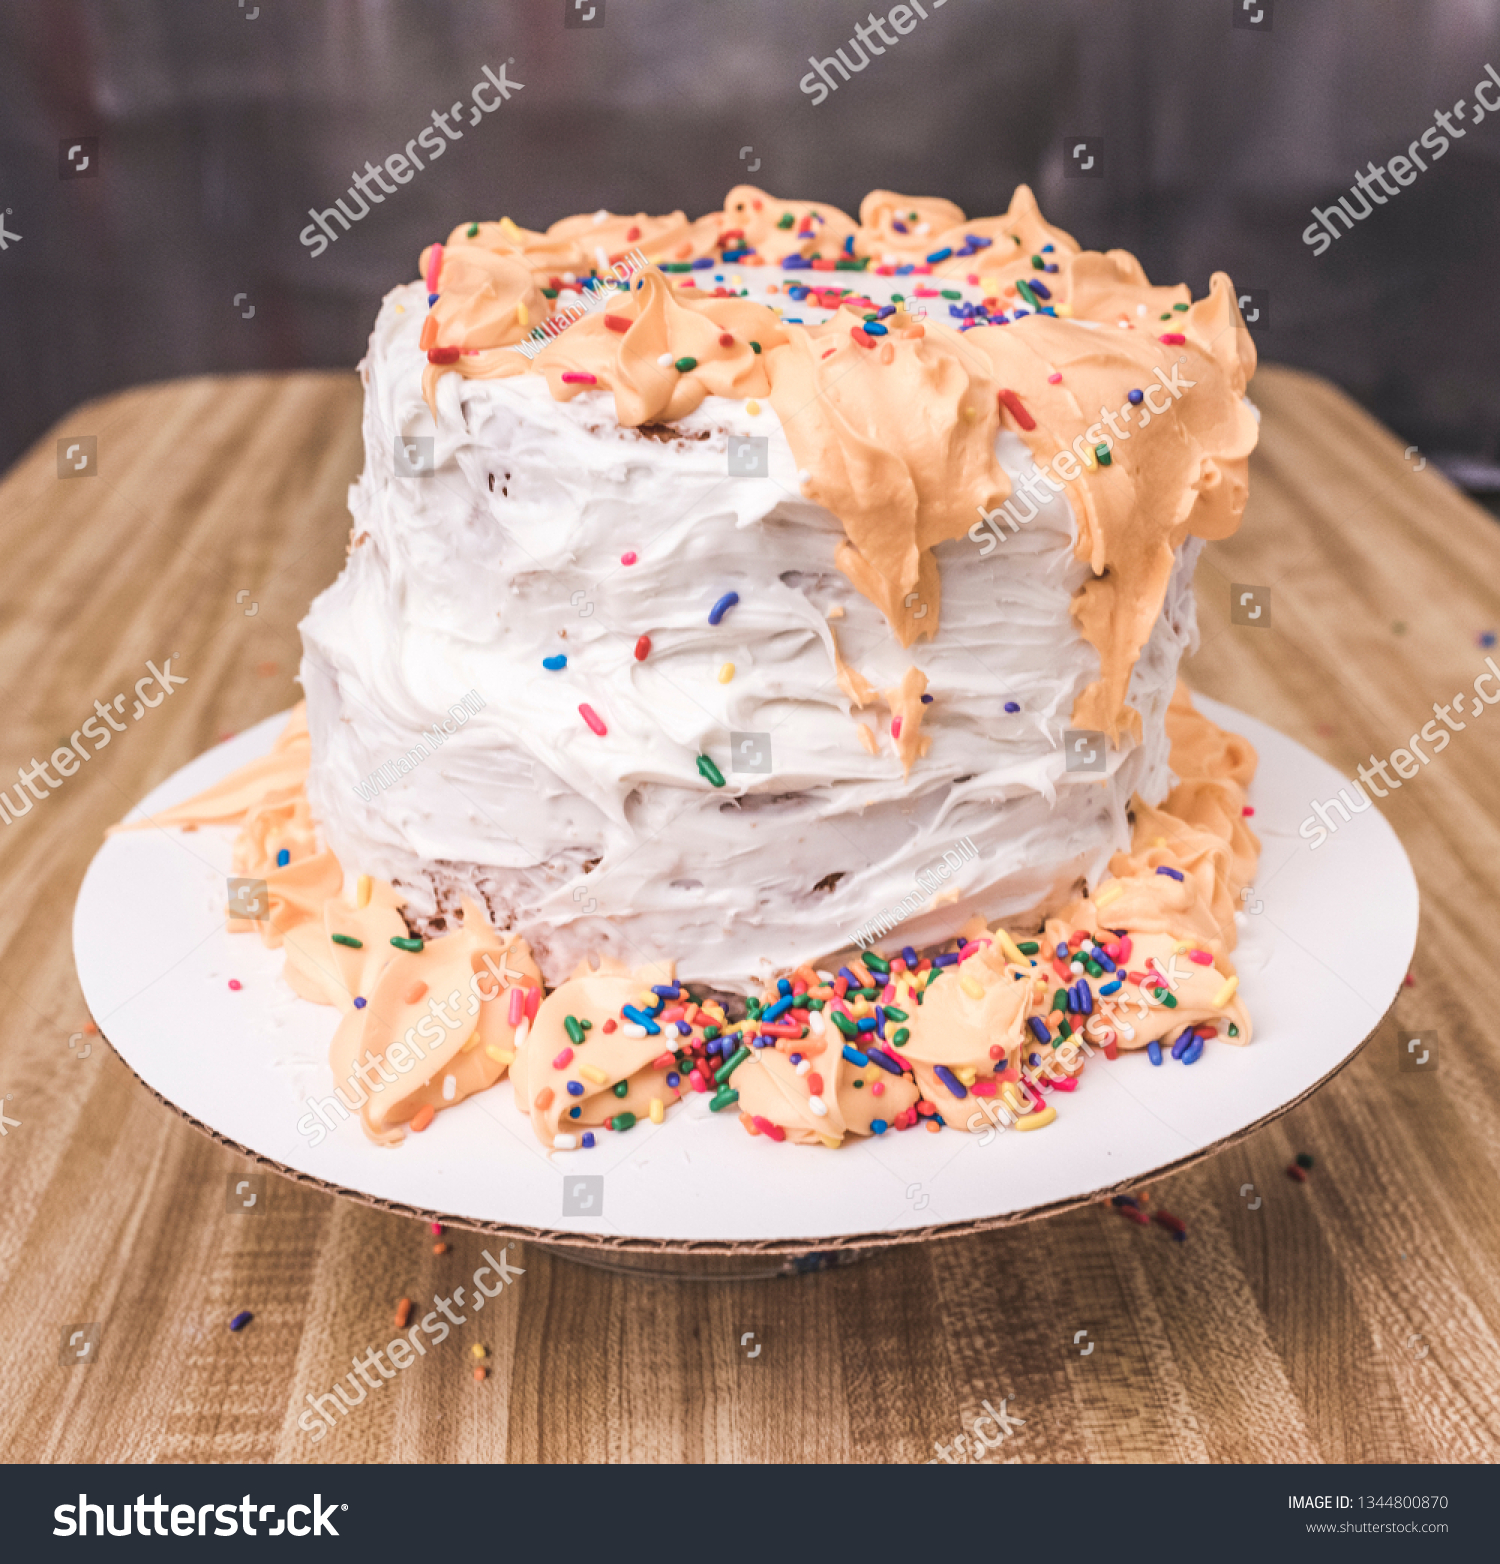 Nasty cake on a wooden table. #1344800870